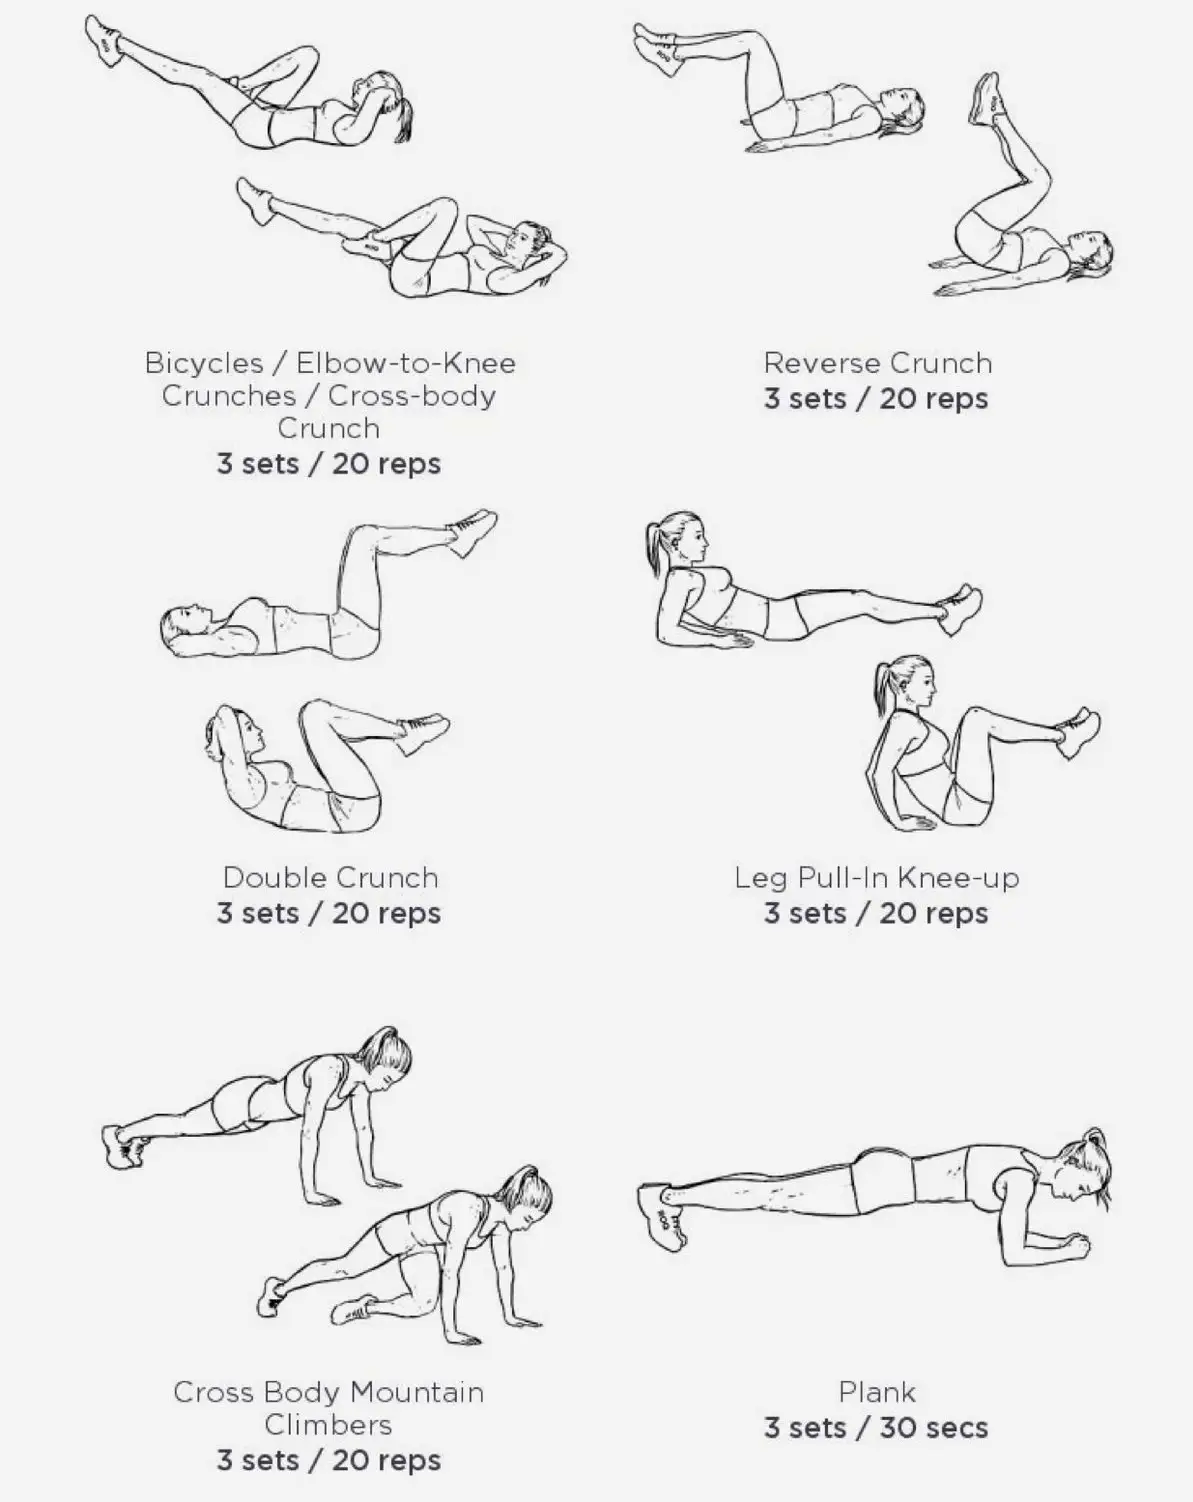 Follow @crazy.yoga.love for yoga tips and exercises Burn 🔥 Repite 1 min  por 4 Rondas 😕 Don't know how to start metabolic diet p